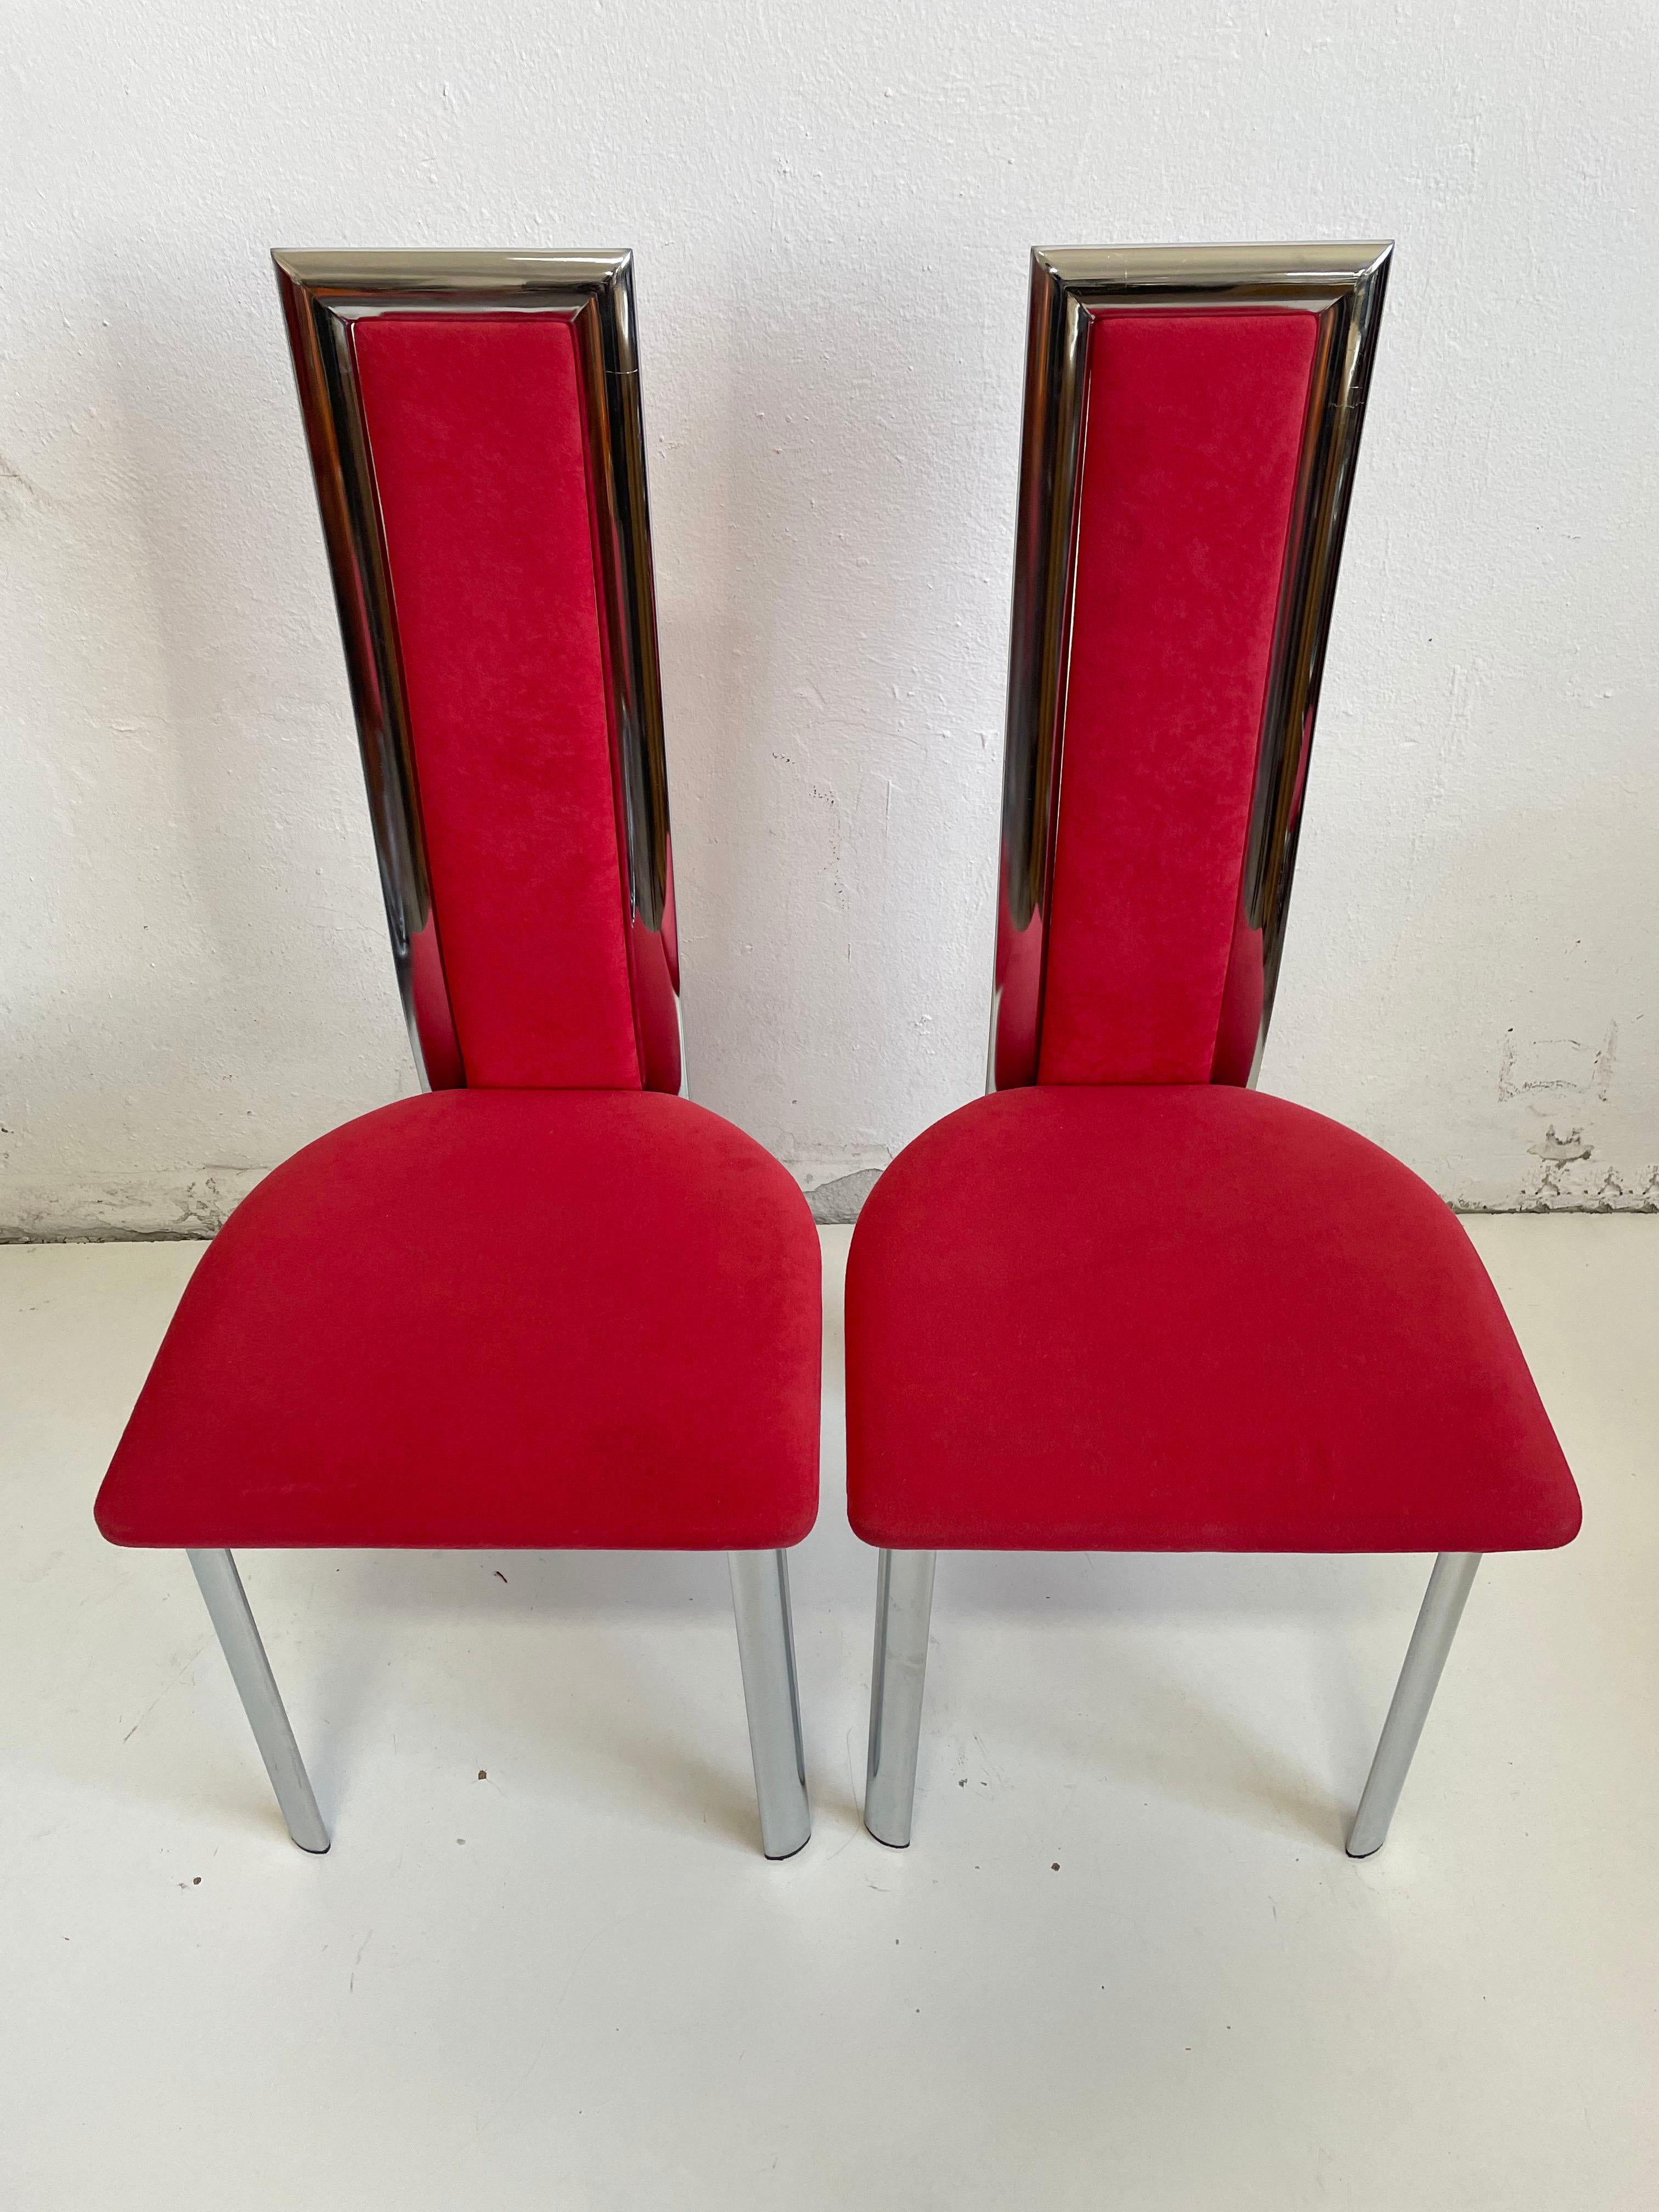 Set of 2 beautiful dining chairs produced in the 1980s

Sculptural postmodern design

Unknown designer and producer

Shiny metal frame with seats and backrests upholstered in a soft red fabric

The chairs are in a very good vintage